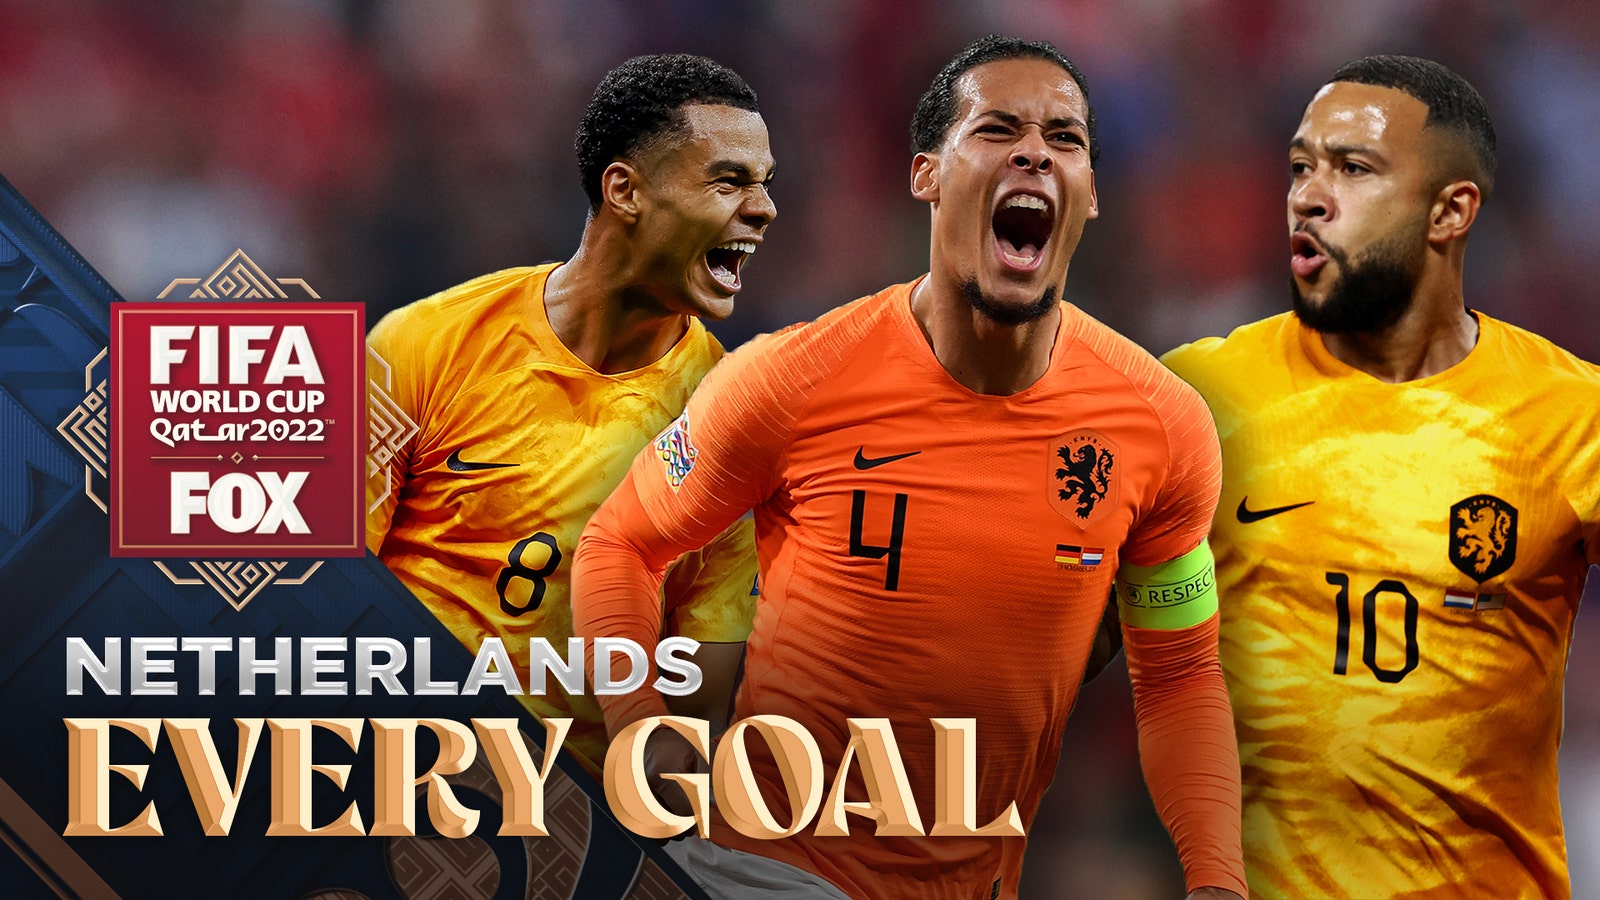 All Netherlands goals at FIFA World Cup 2022